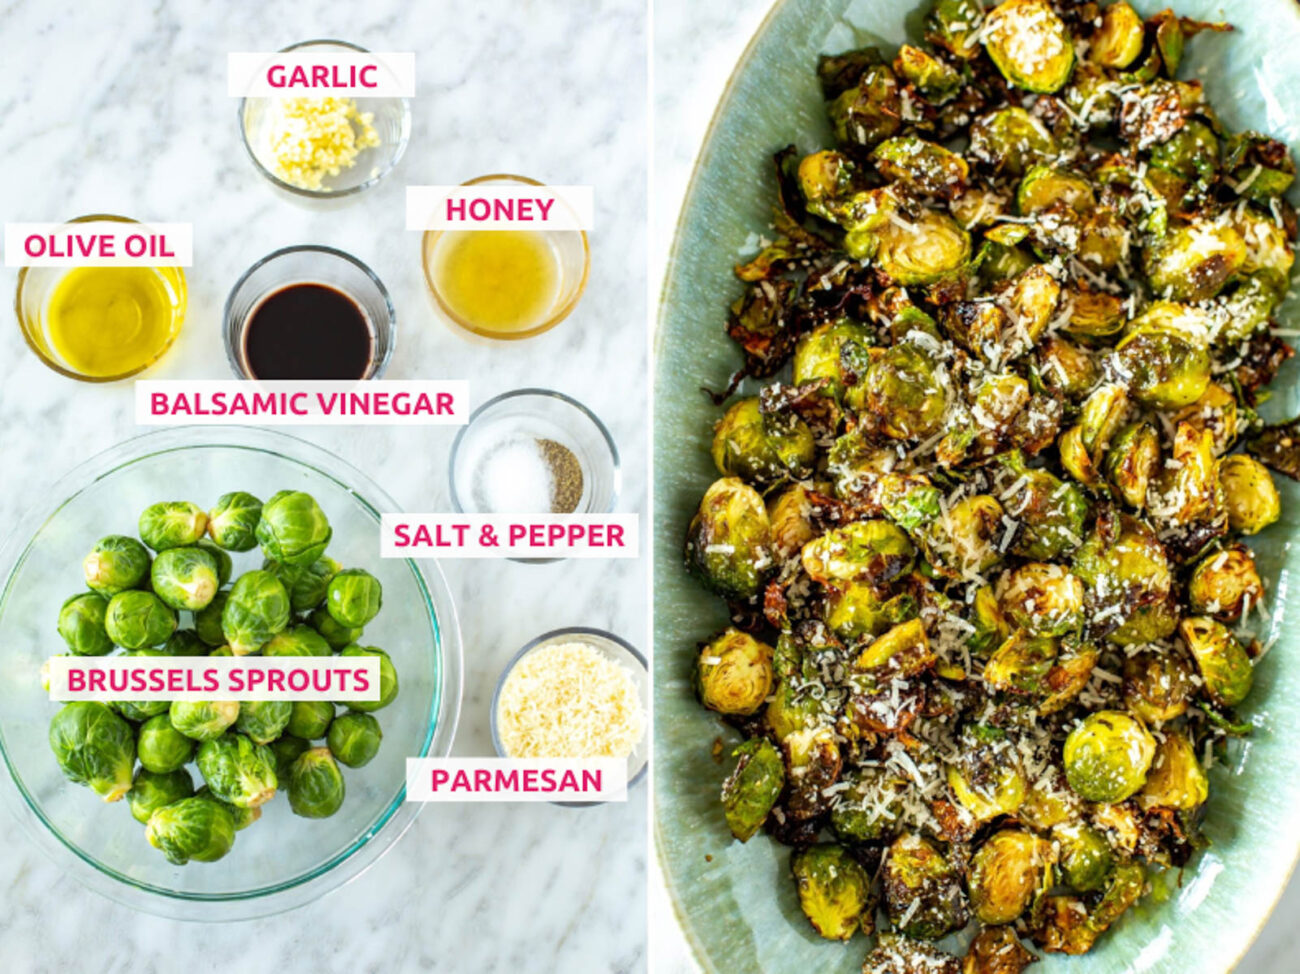 ingredients for air fryer brussels sprouts: brussels sprouts, parmesan, balsamic vinegar, olive oil, honey, garlic, salt and pepper.